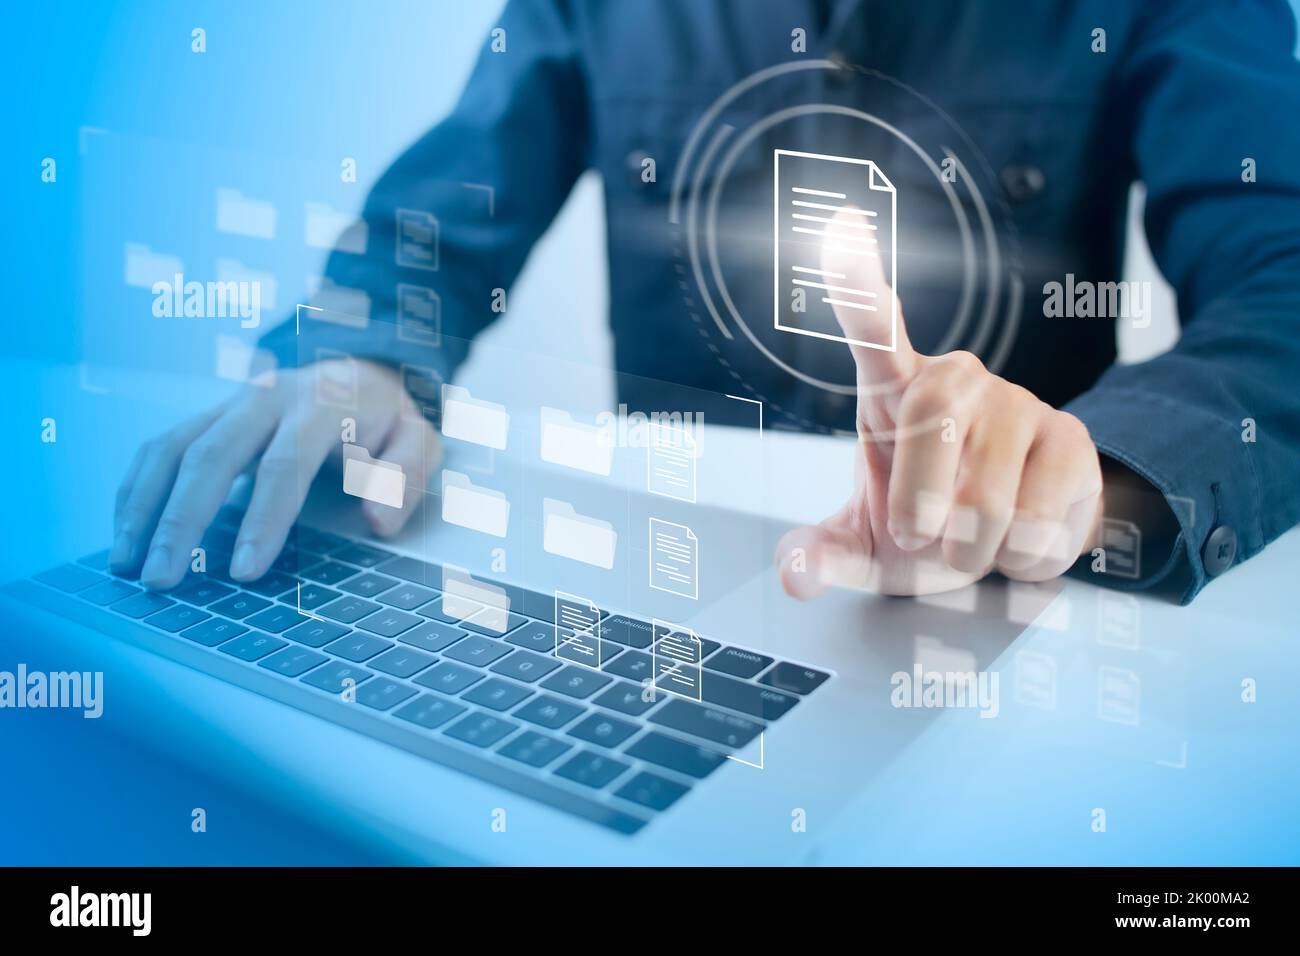 Document Management System (DMS) Online Document Database and automated processes to manage files, knowledge, and documents in an organization effecti Stock Photo